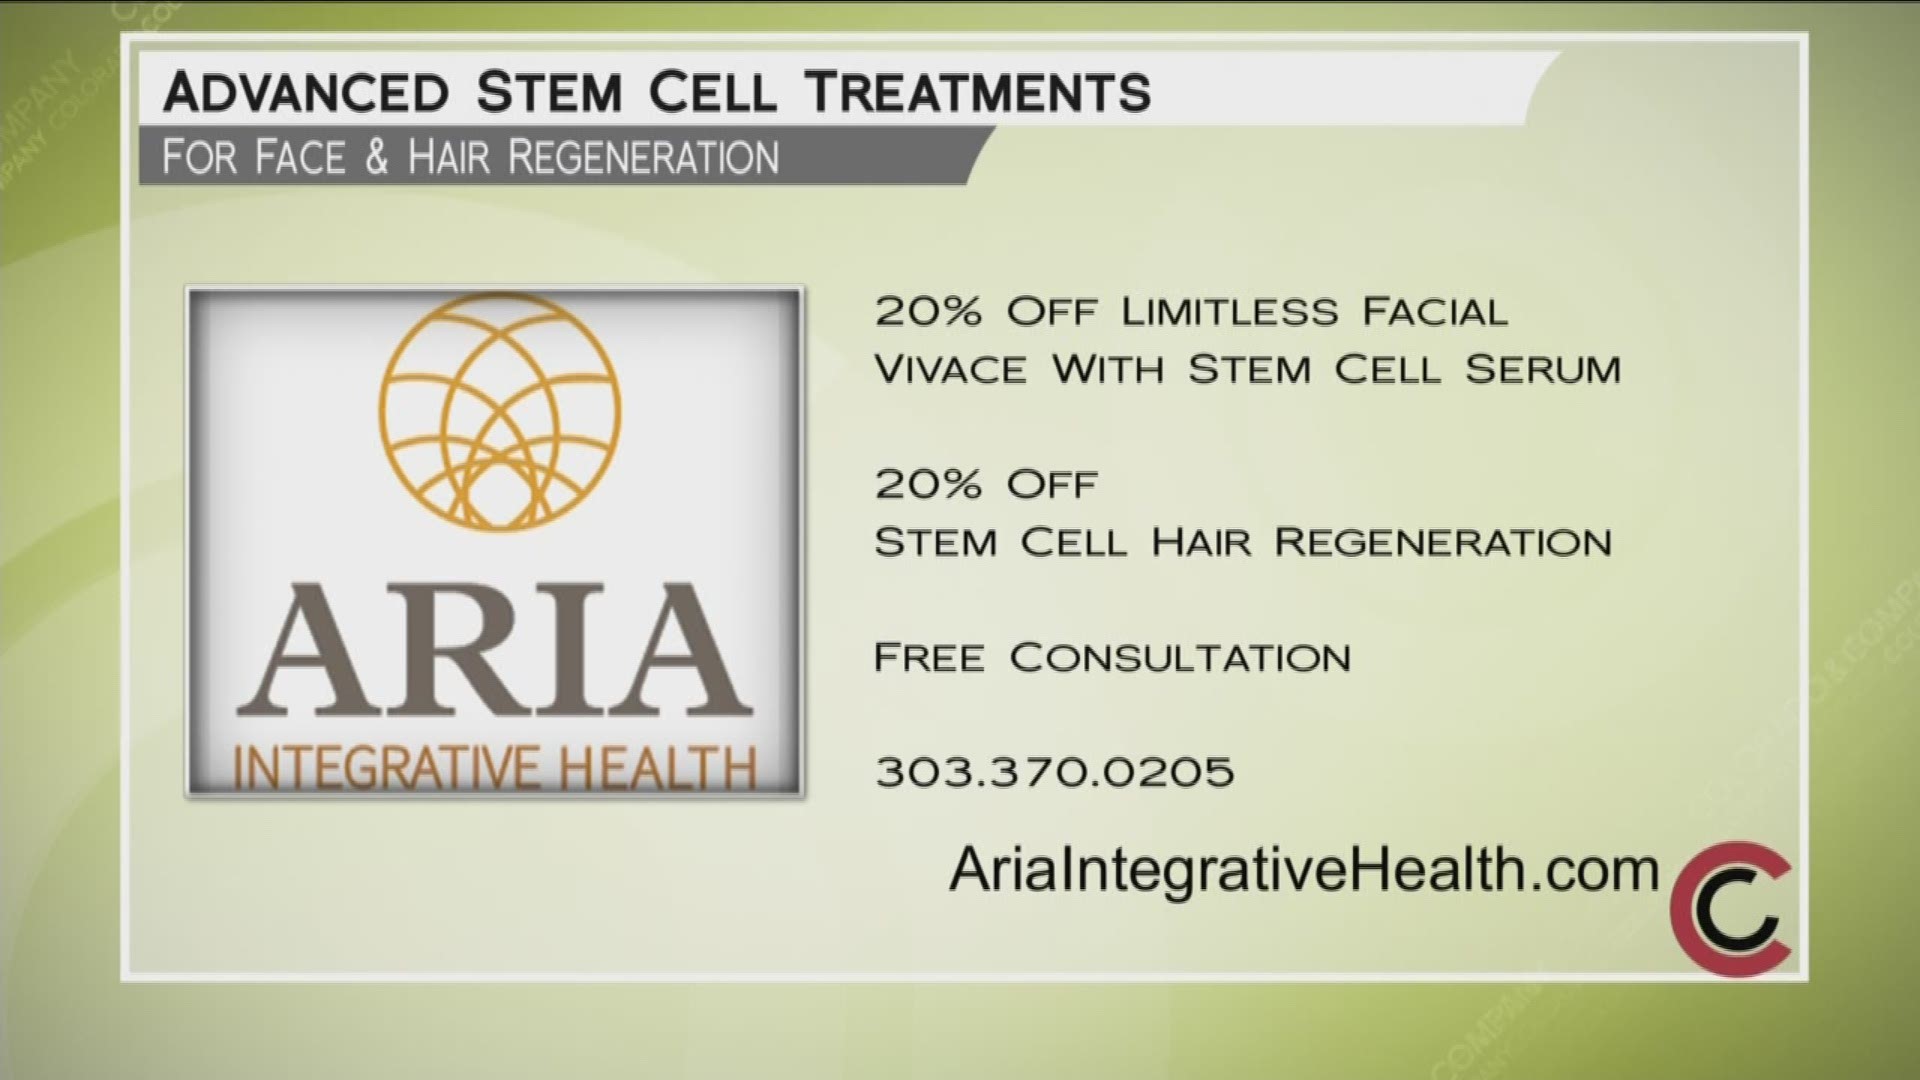 The newest advancements in stem cell treatments are at Aria Integrative Health. The Limitless Facial using Vivace and stem cell serum is at an amazing 40% off! Stem cell hair regeneration treatments are 40% off, as well! Call for your free consultation—303.953.2899. For a full menu of services, visit www.AriaIntegrativeHealth.com. 
THIS INTERVIEW HAS COMMERCIAL CONTENT. PRODUCTS AND SERVICES FEATURED APPEAR AS PAID ADVERTISING.